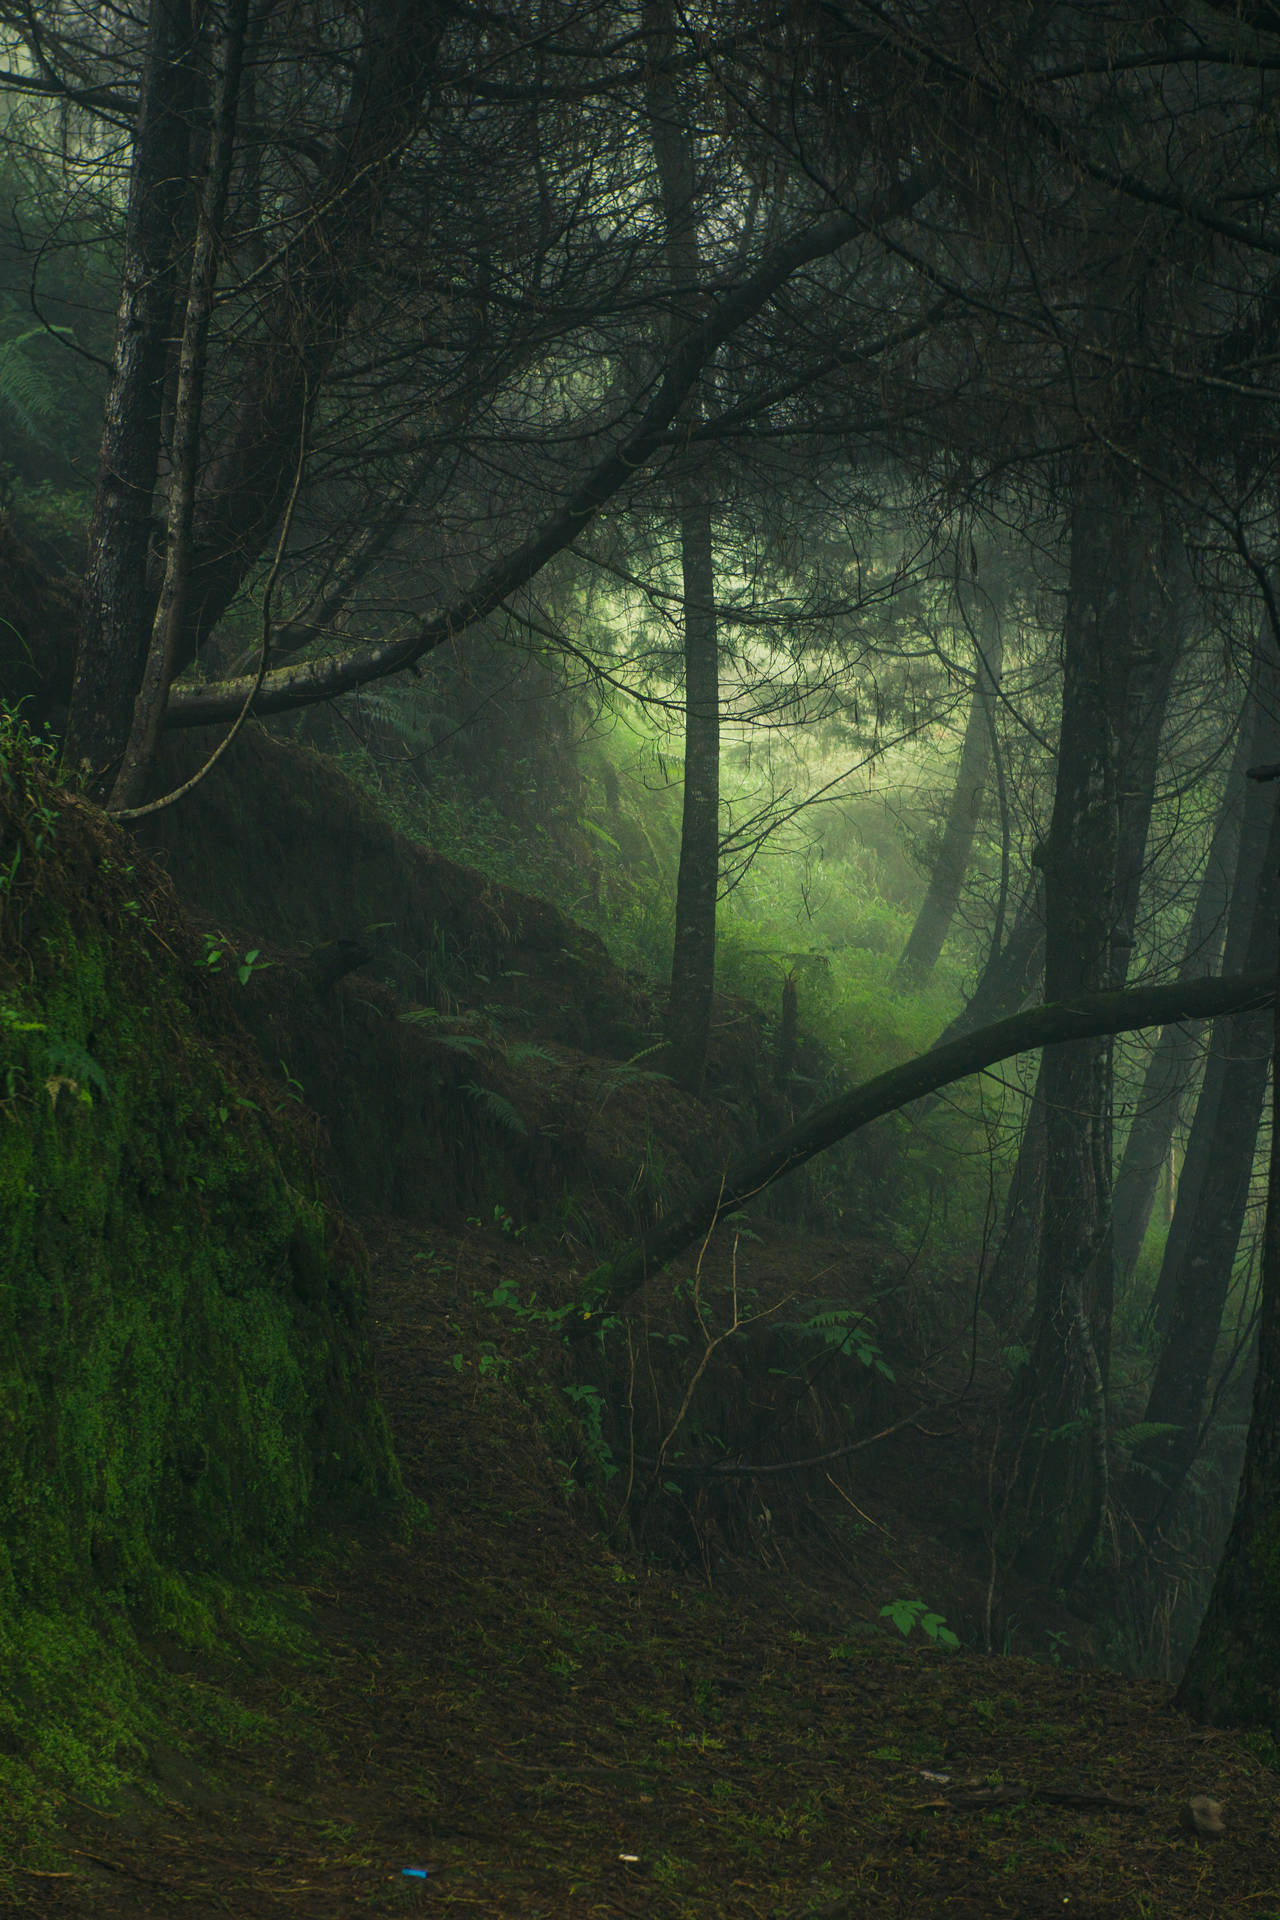 Escape the hustle and bustle of everyday life and enjoy the serene calm of a misty forest Wallpaper